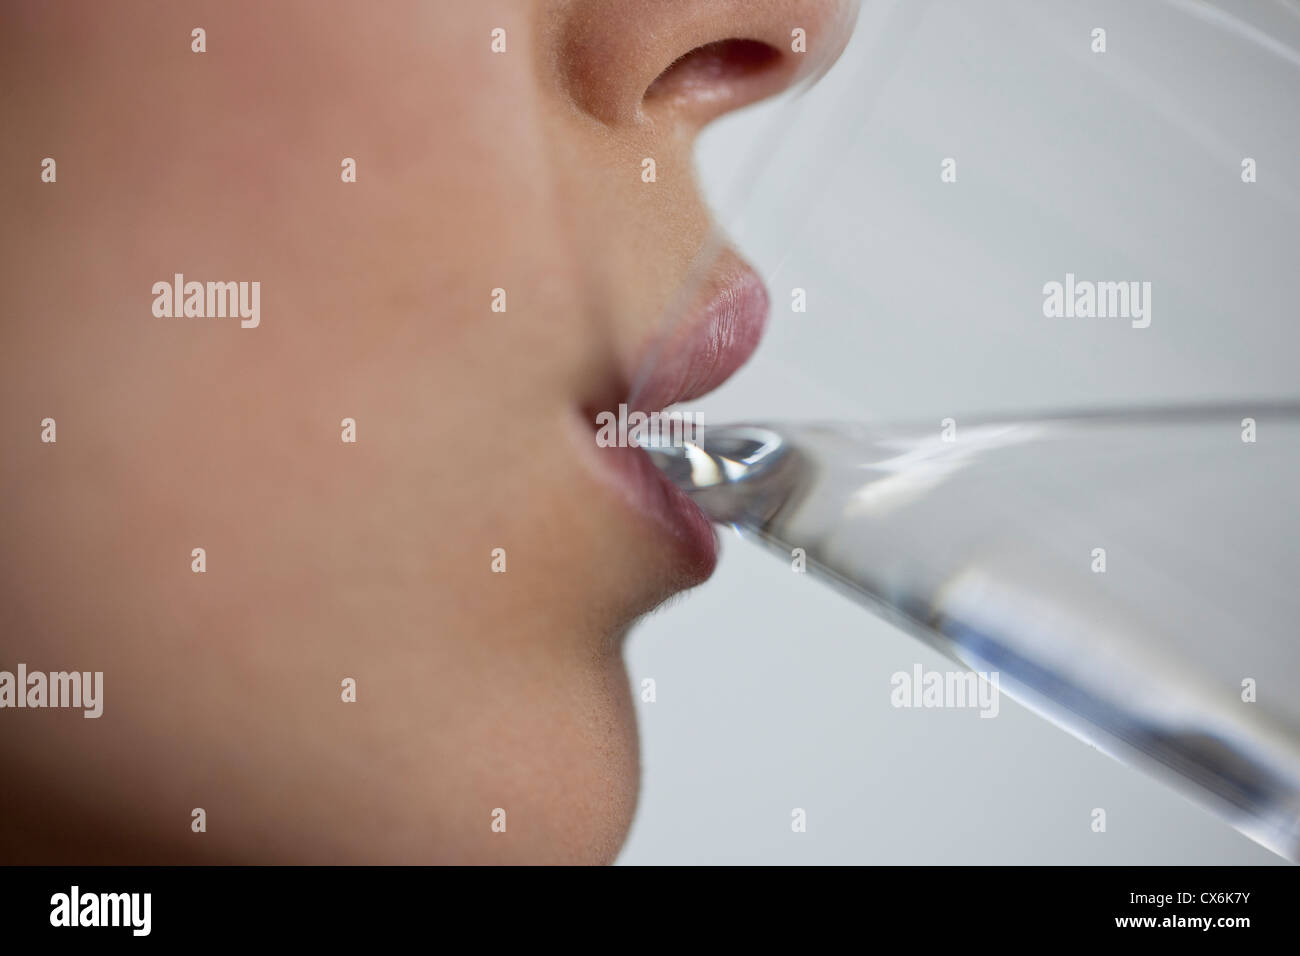 A young woman drinking a glass of water, close up of mouth Stock Photo